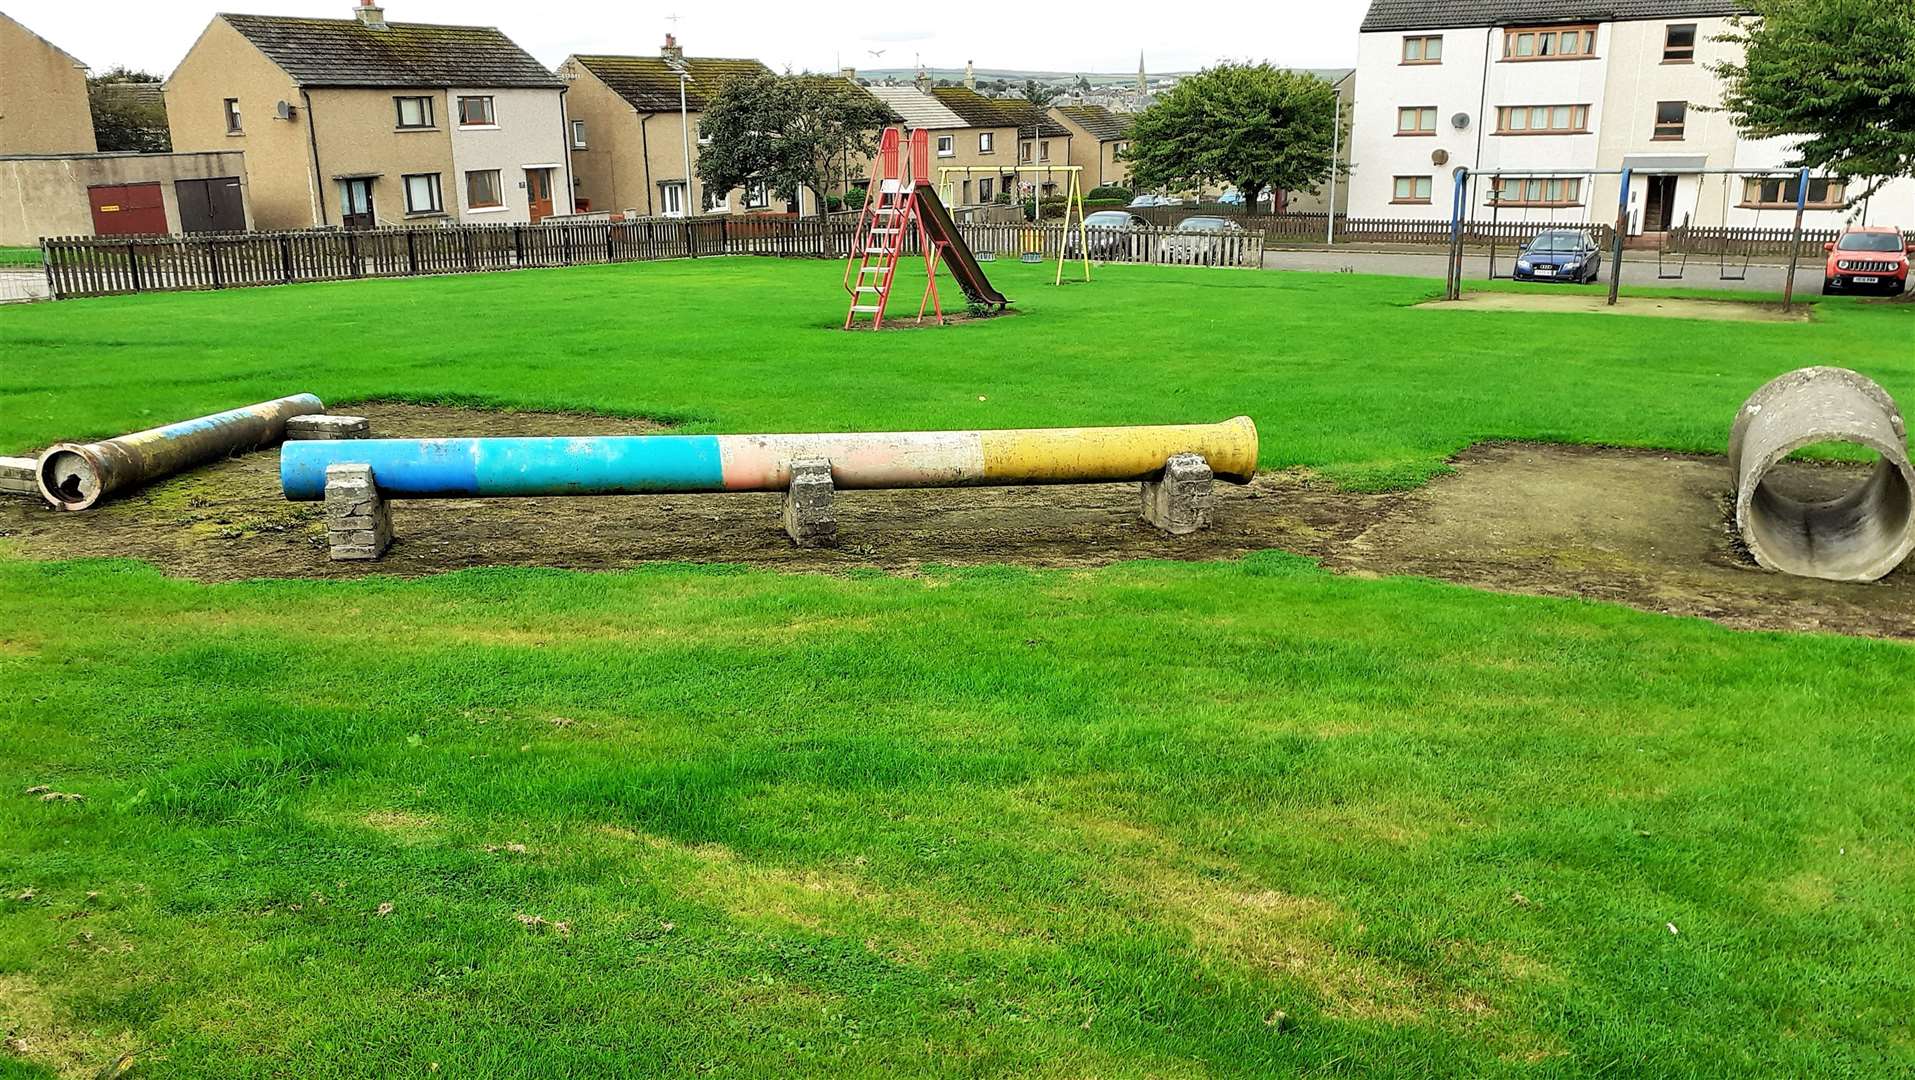 Thurso play park at Murkle Terrace which Mr Glasgow thinks needs improvement.